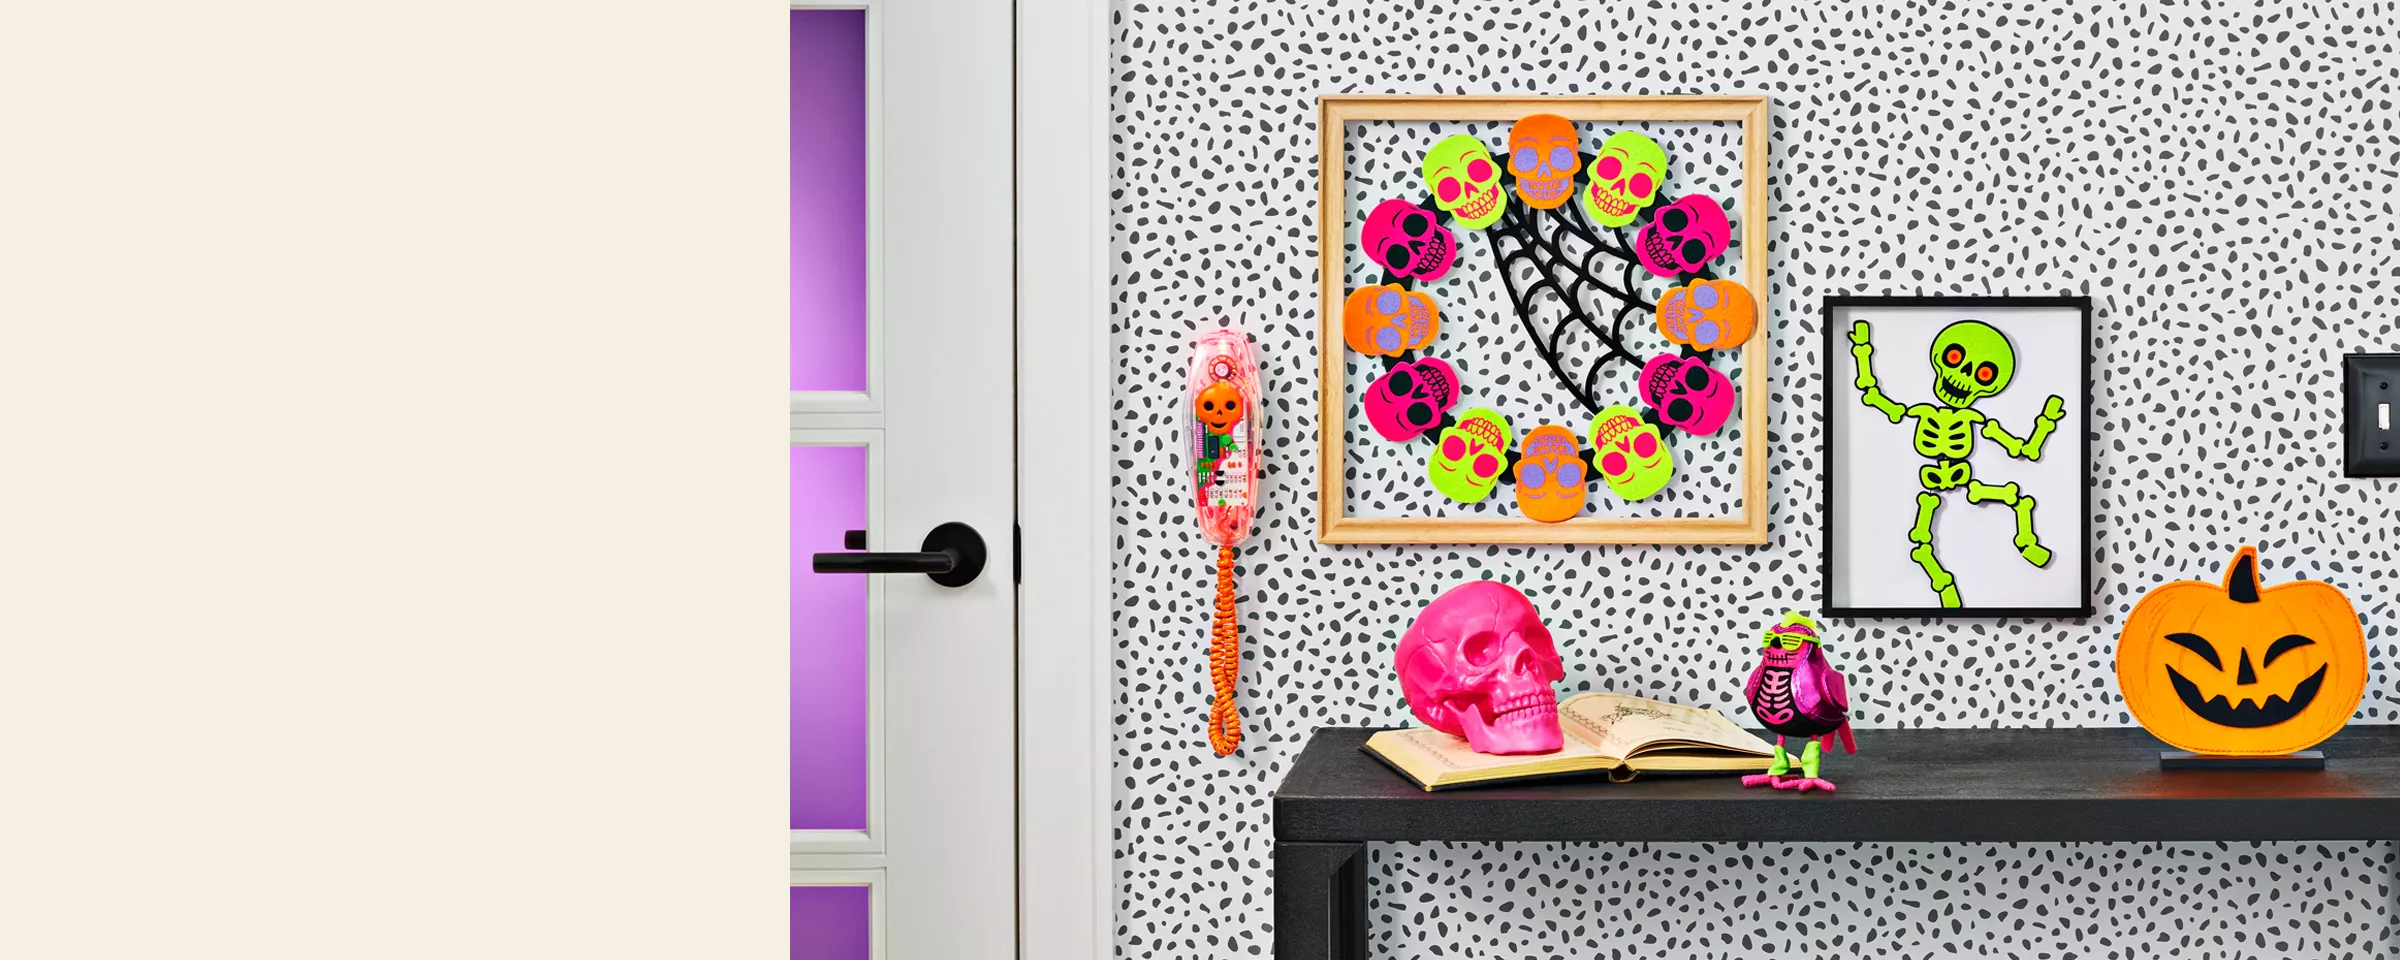 This decor is bright, fun & reflective of the 80s. A pumpkin, pink skull & small purple bird with neon green accessories sit on a side table. A wreath of multi-colored skulls hangs on the wall between a framed skeleton & a Halloween wall phone.